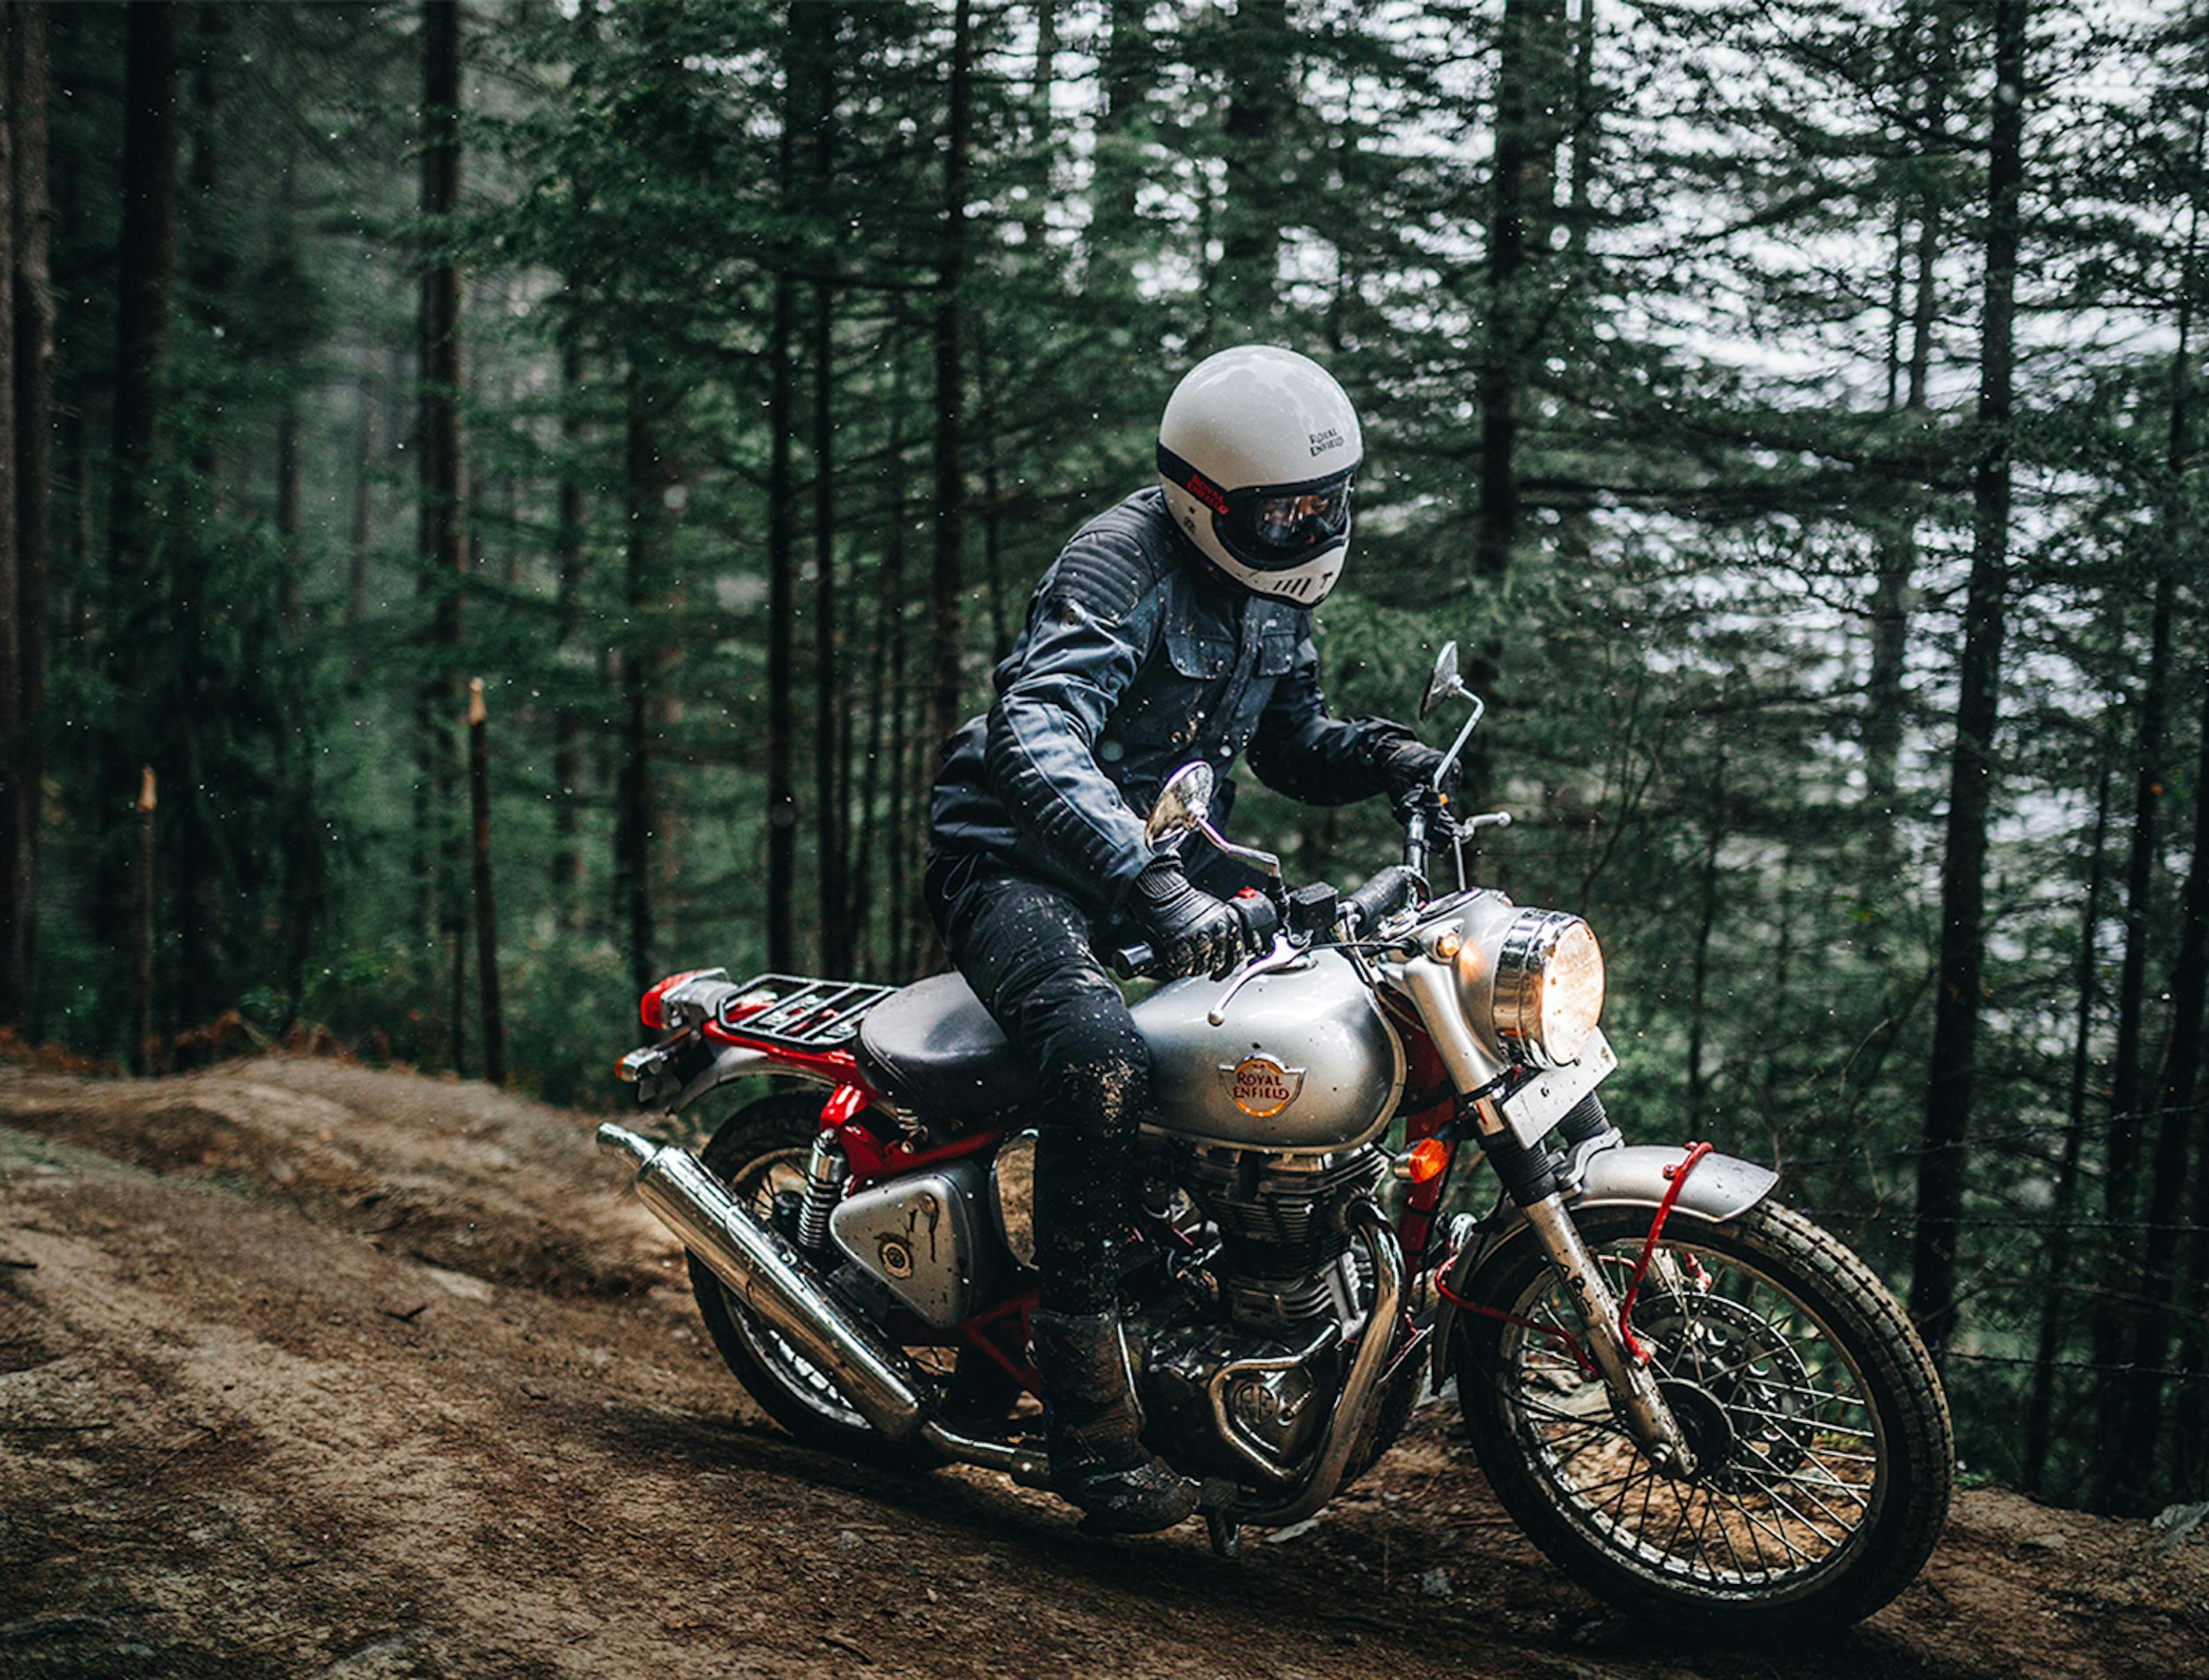 4-Stroke Motorcycle Royal Enfield Bullet Trial 350 in the forest